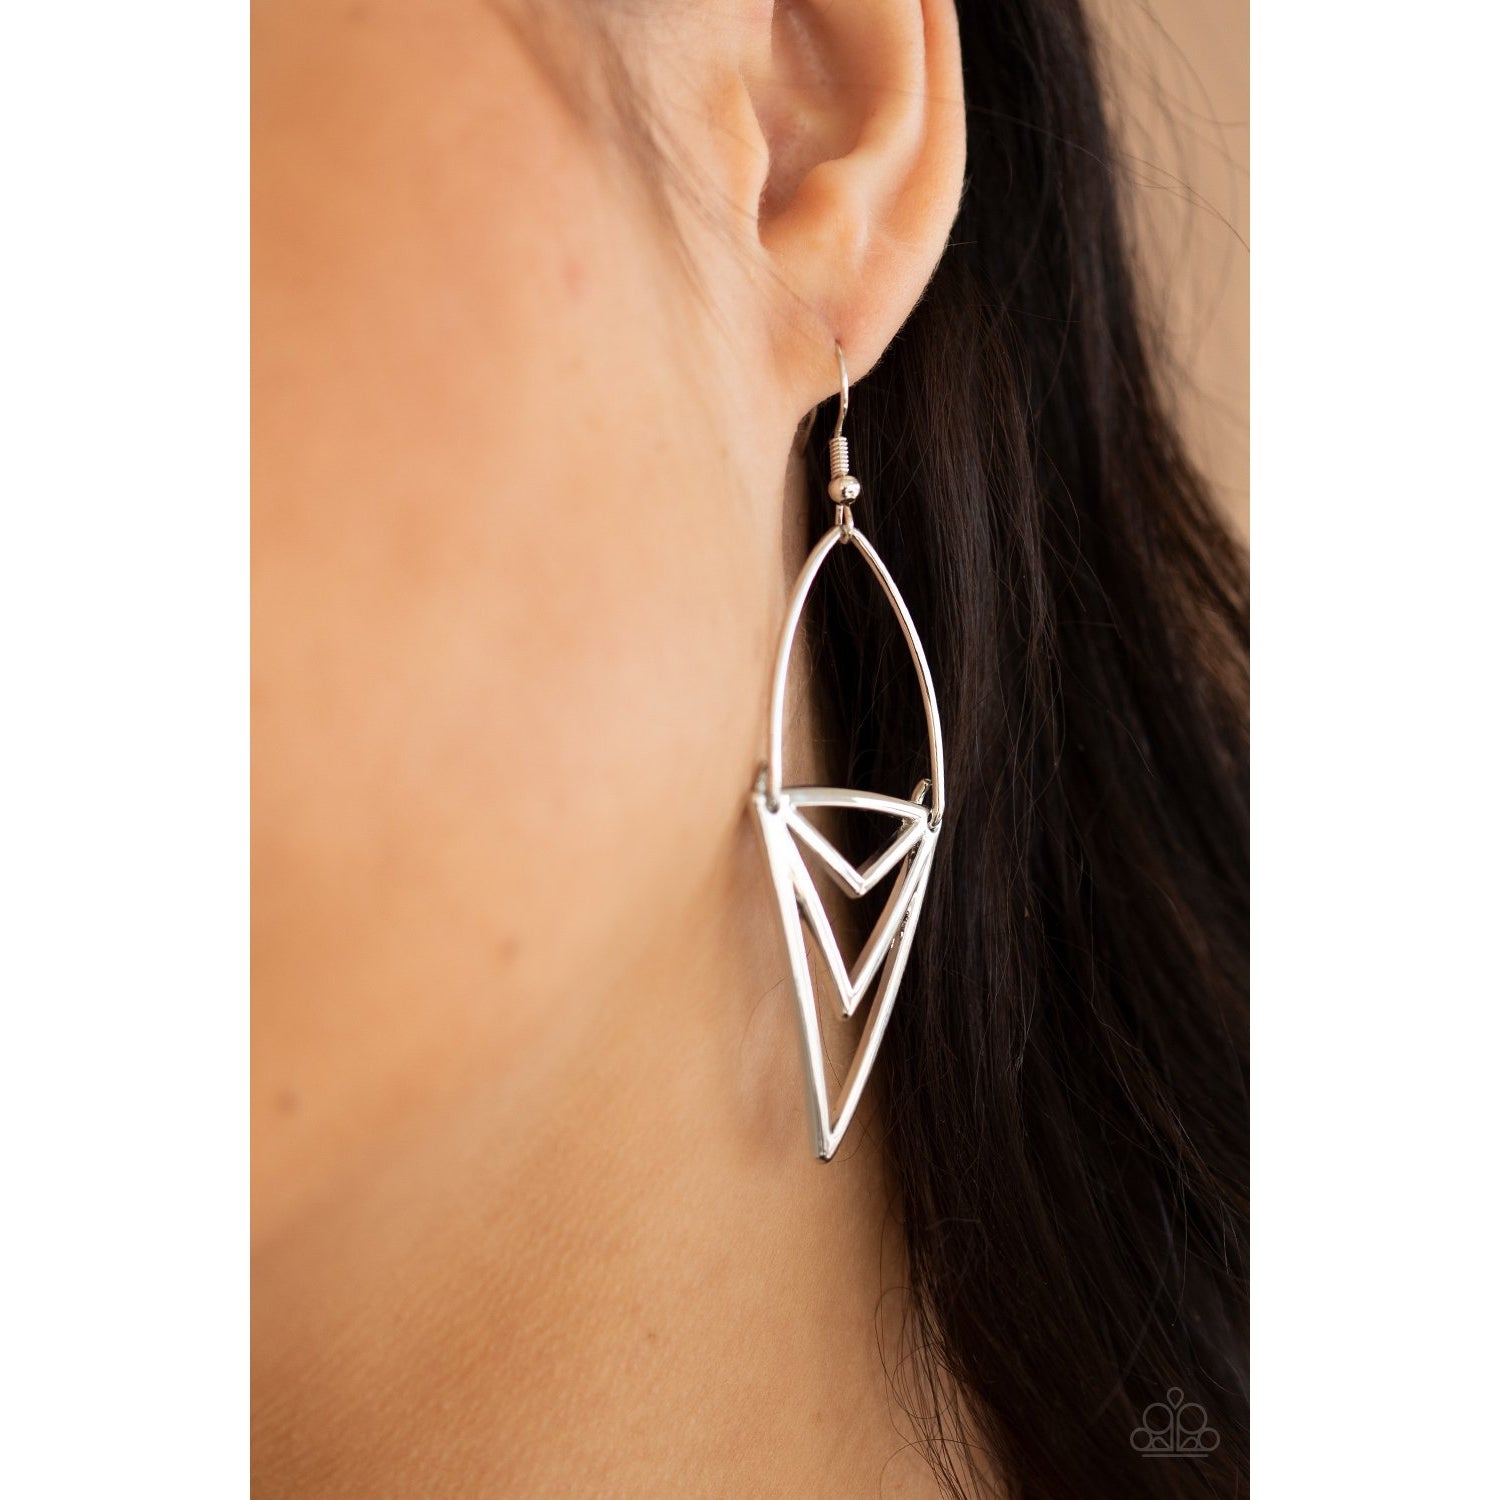 Proceed With Caution - Silver Earrings - Paparazzi Accessories - GlaMarous Titi Jewels